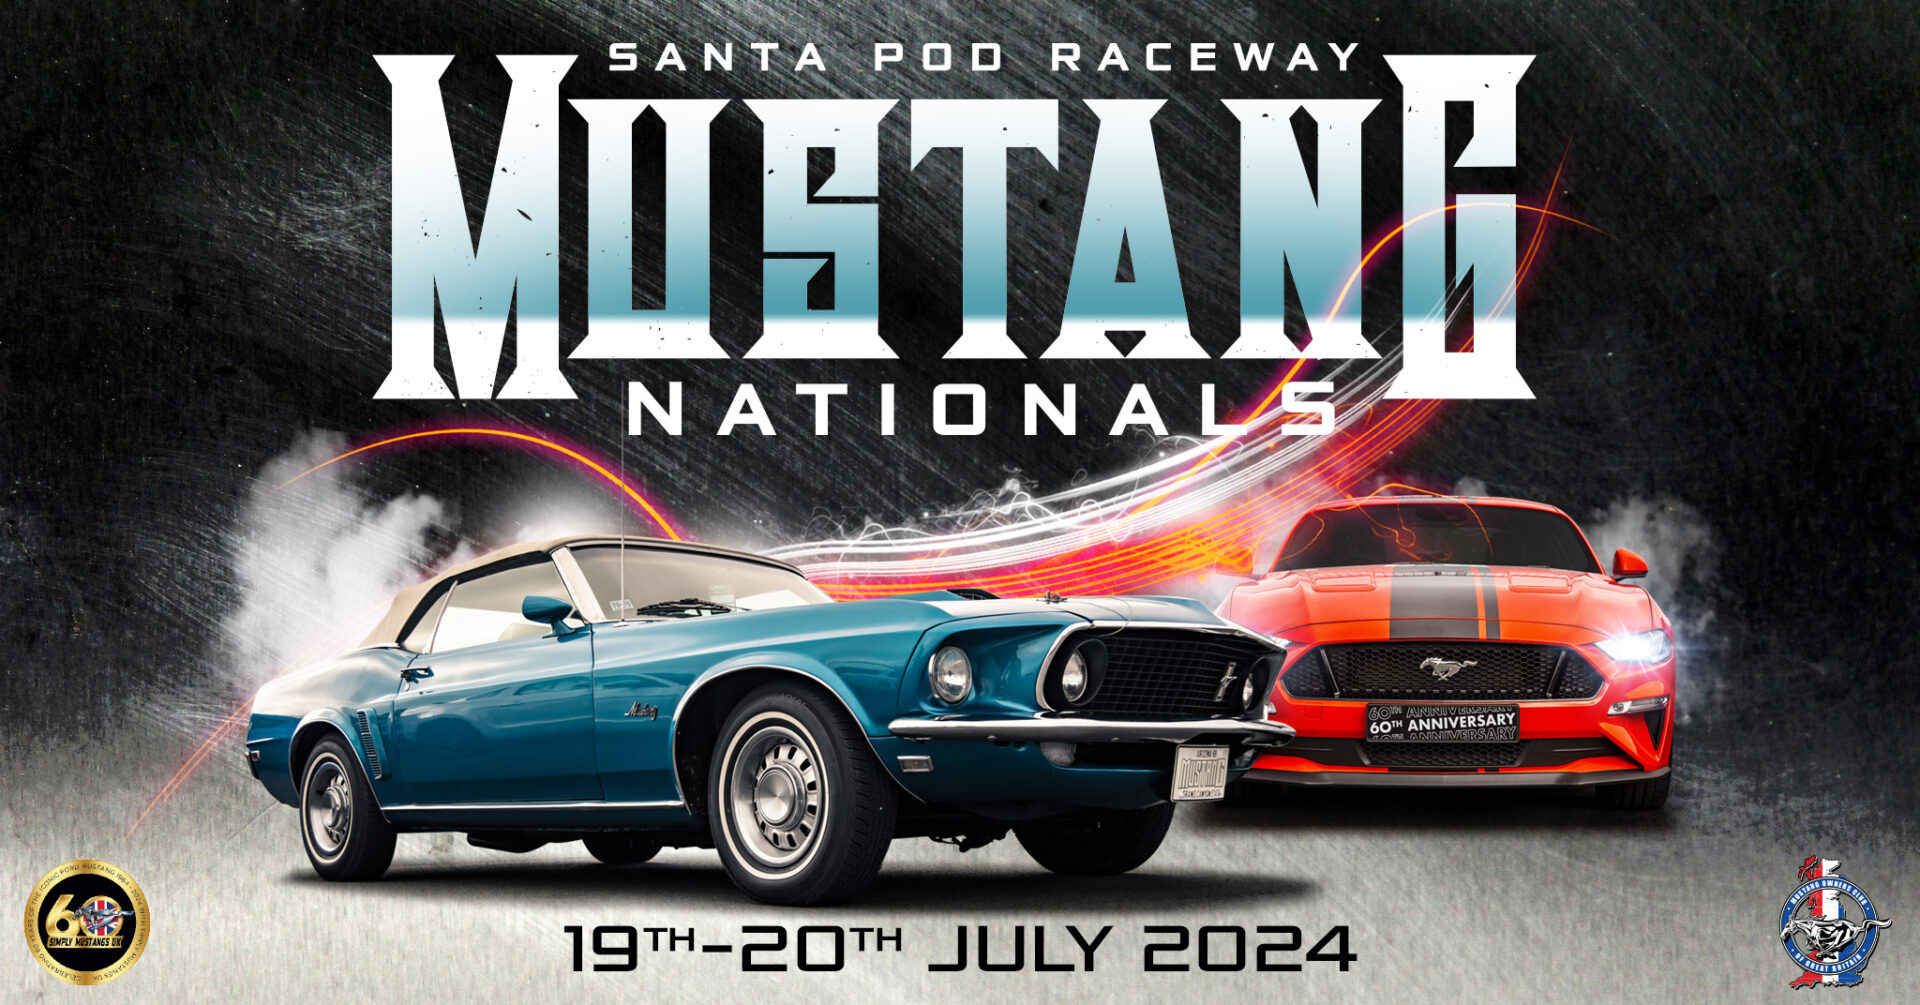 The Mustang Nationals